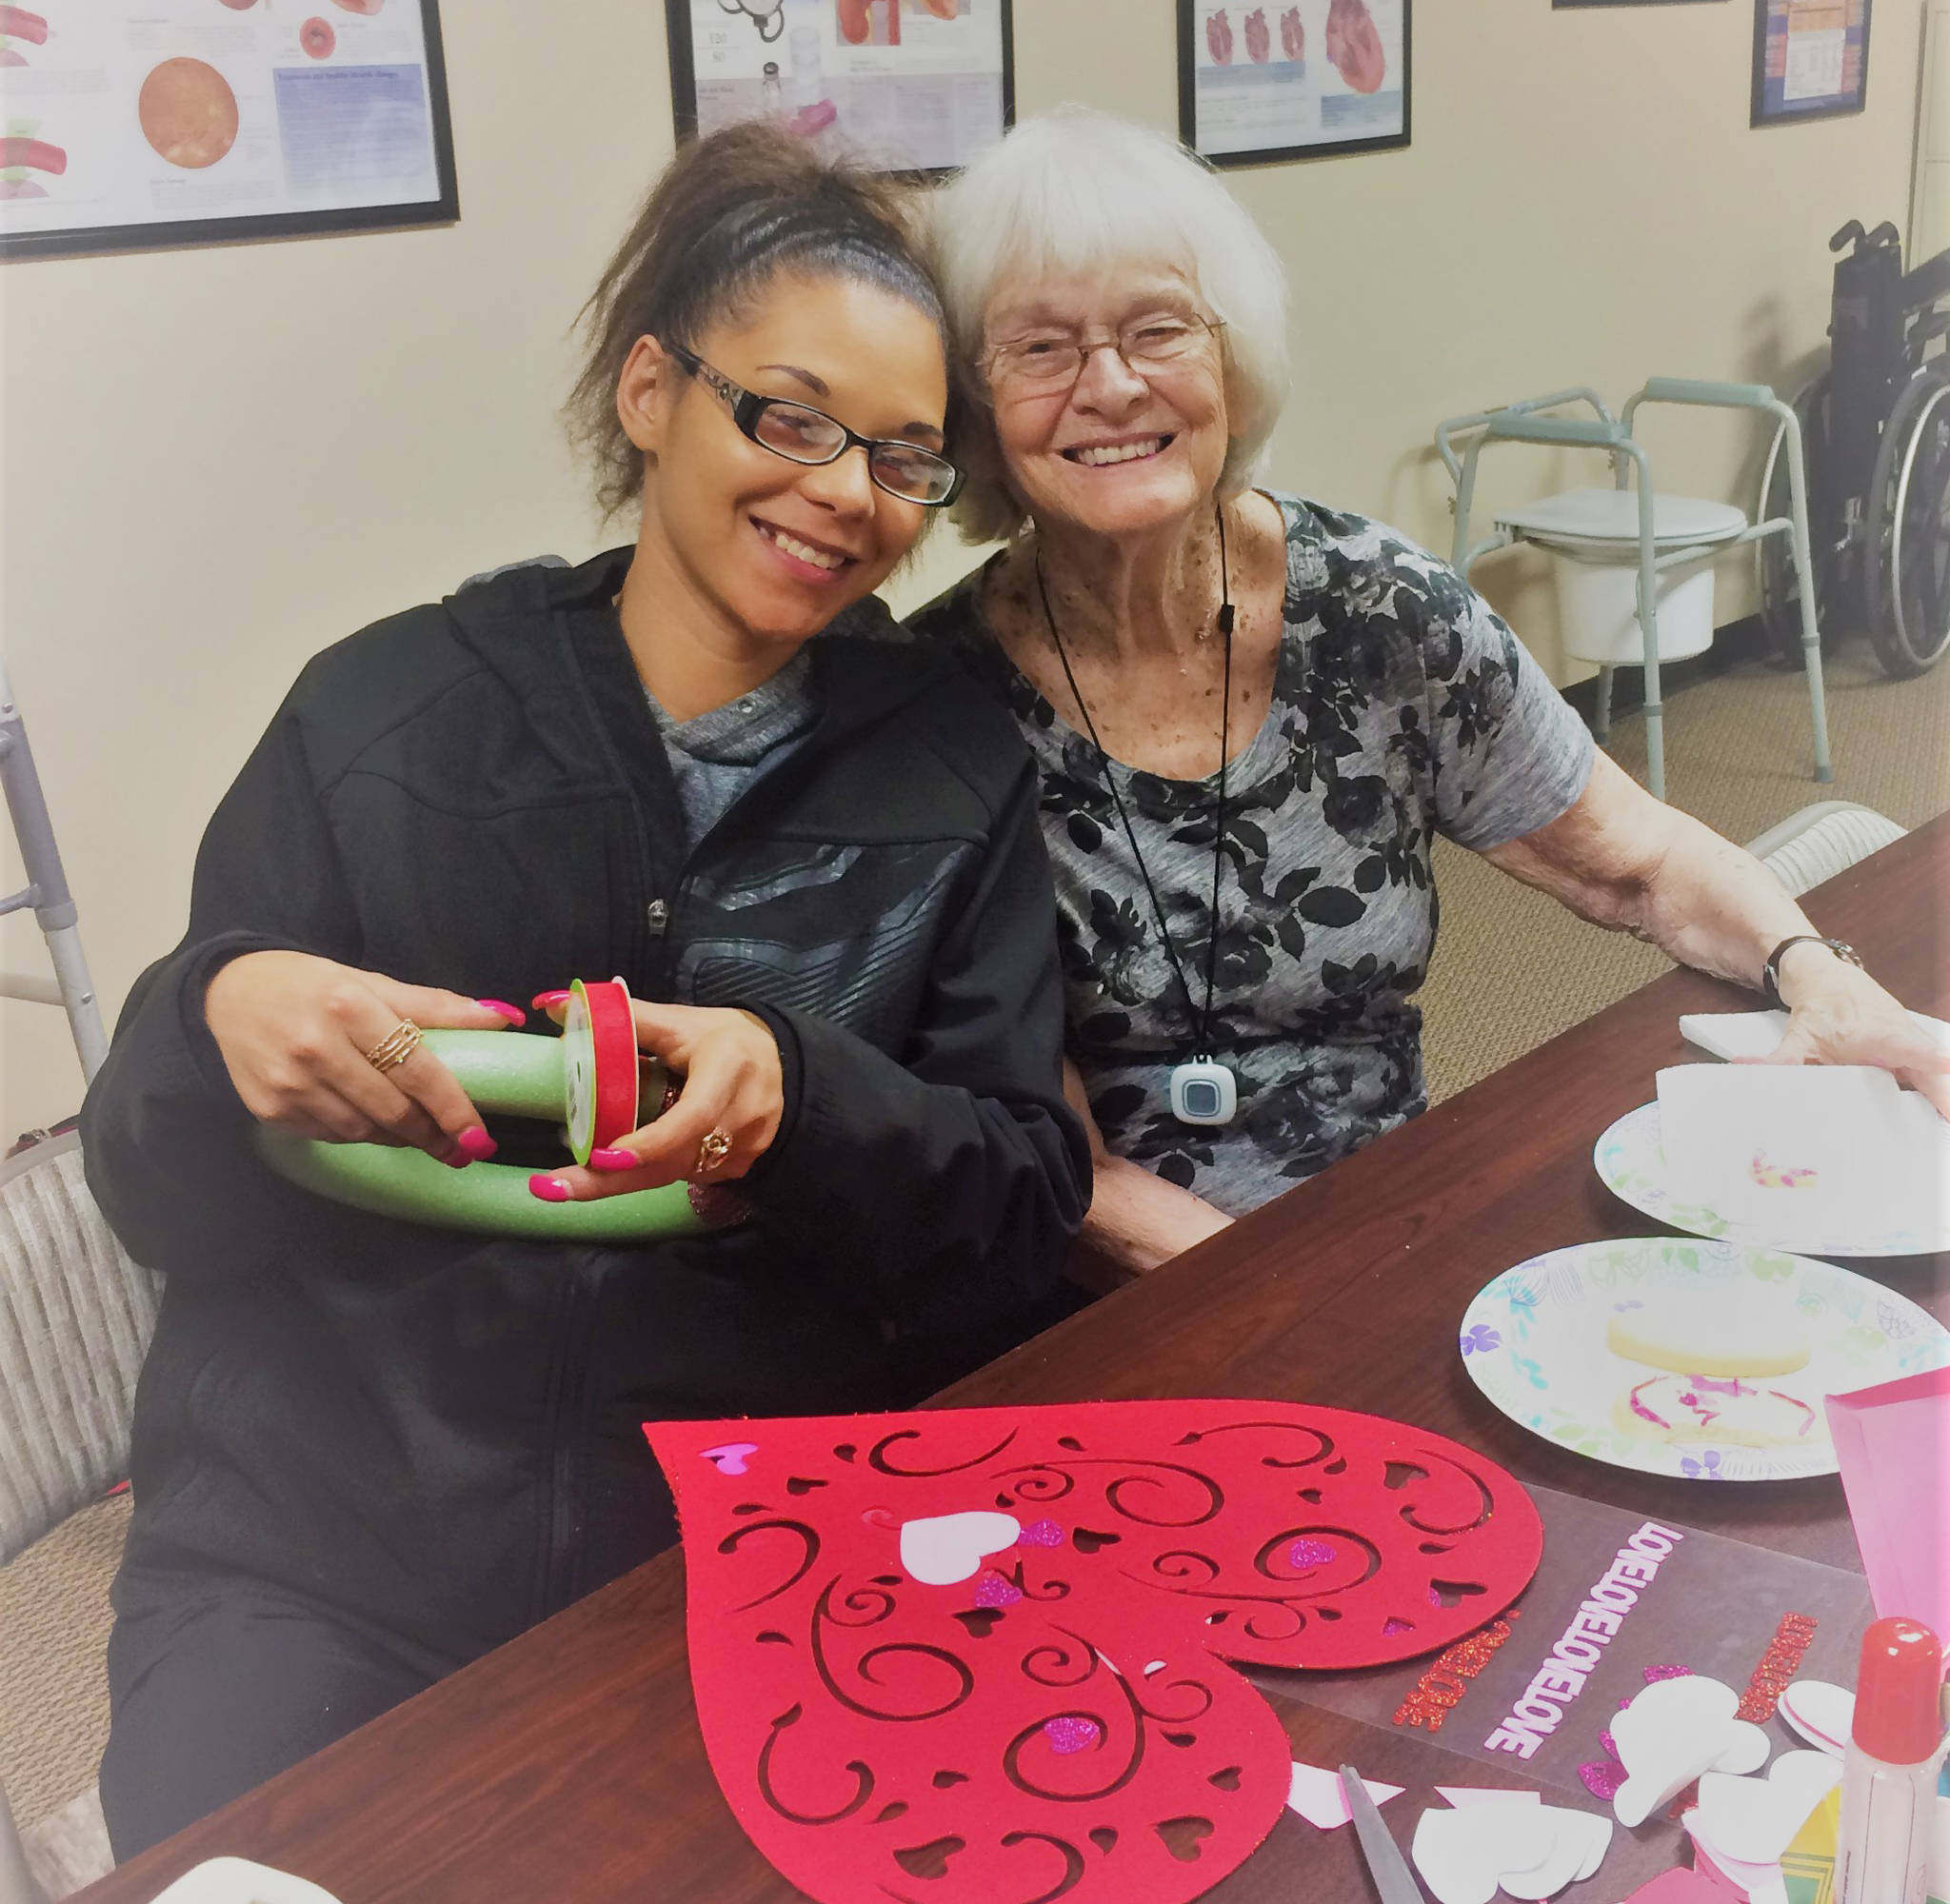 Active engagement through activities, music and outings, for example, can improve the quality of life for individuals with dementia, says the Homewatch Caregivers of Western Washington.